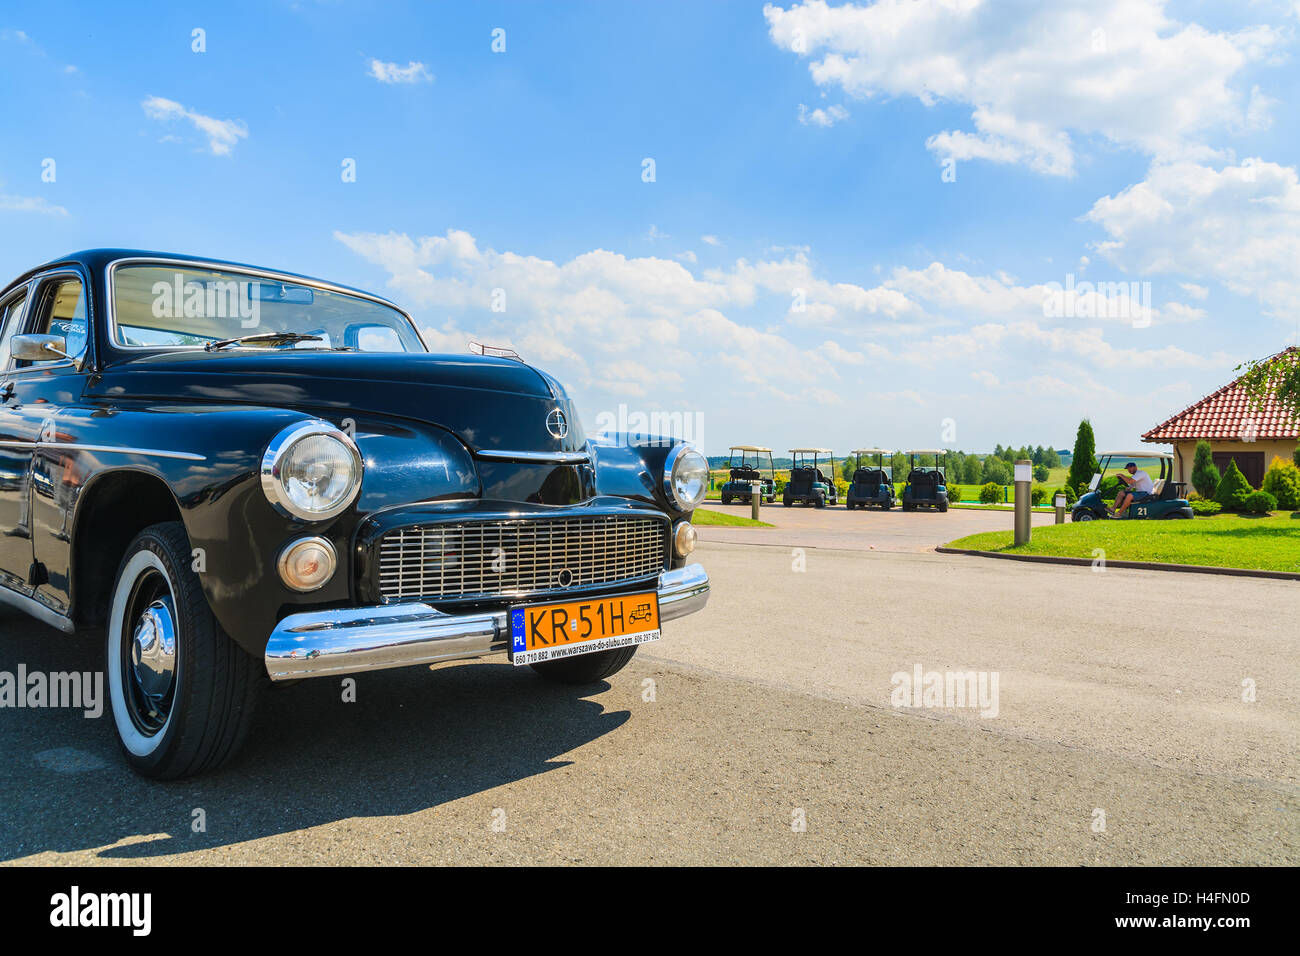 PACZULTOWICE GOLF CLUB, POLAND - AUG 9, 2014: old classic car parks on street in Paczultowice Golf Club. Vintage cars are popular to drive people to weeding ceremony. Stock Photo